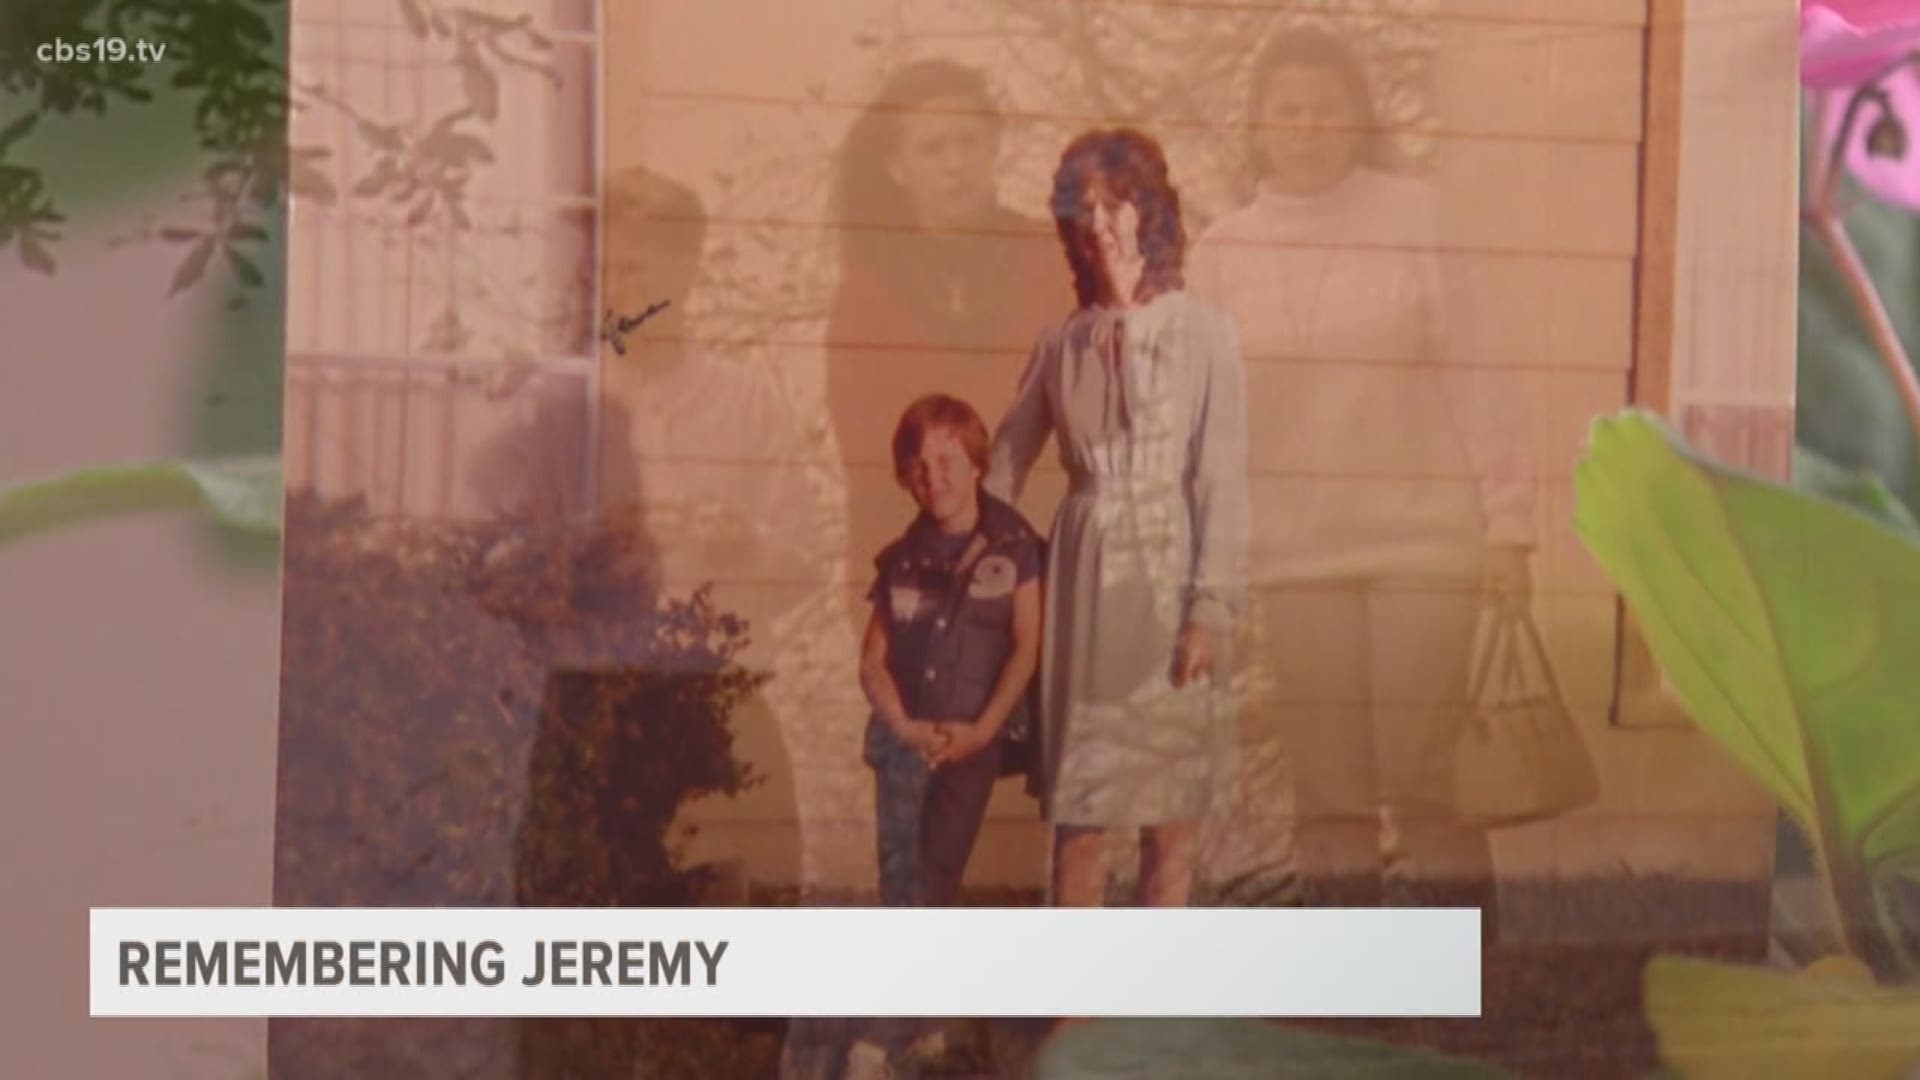 Jeremy Delle committed suicide in a classroom at Richardson High School, and Pearl Jam later named a song after him. For 27 years, his mother hasn't spoken publicly about Jeremy's death  ? until now.